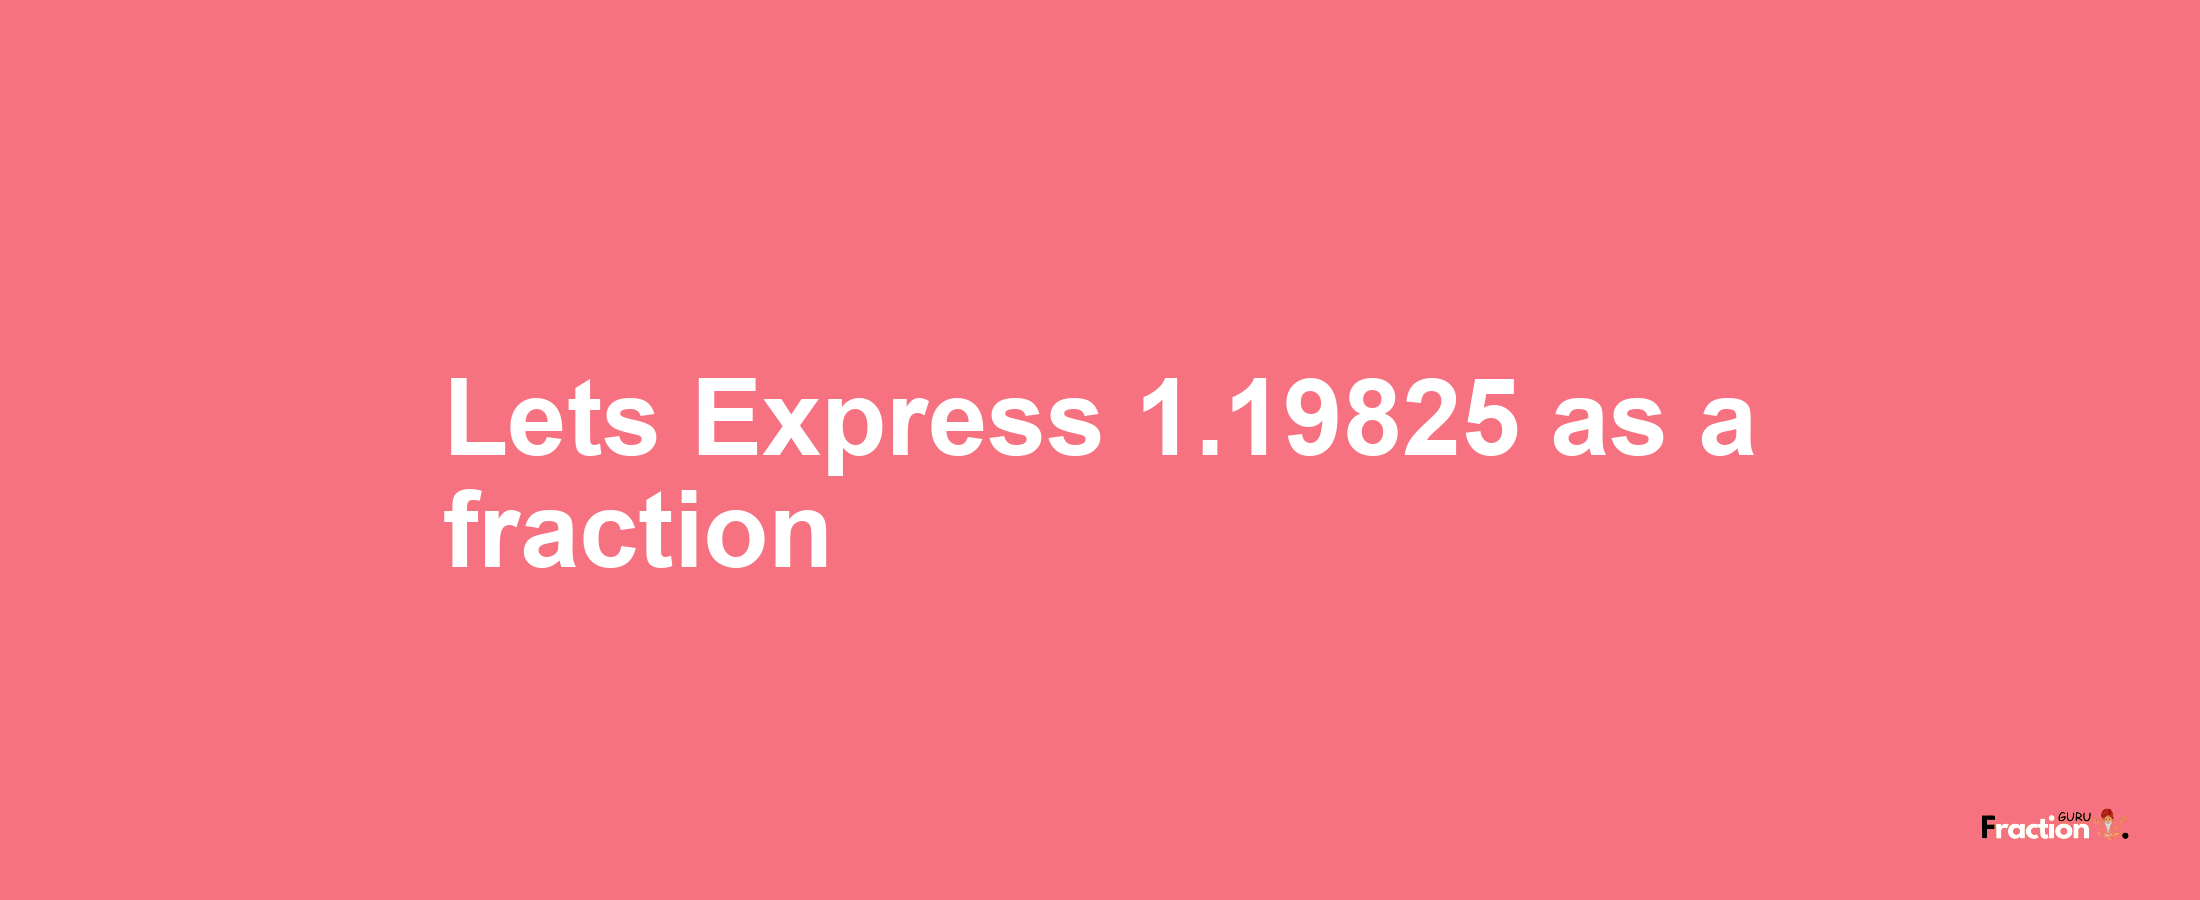 Lets Express 1.19825 as afraction